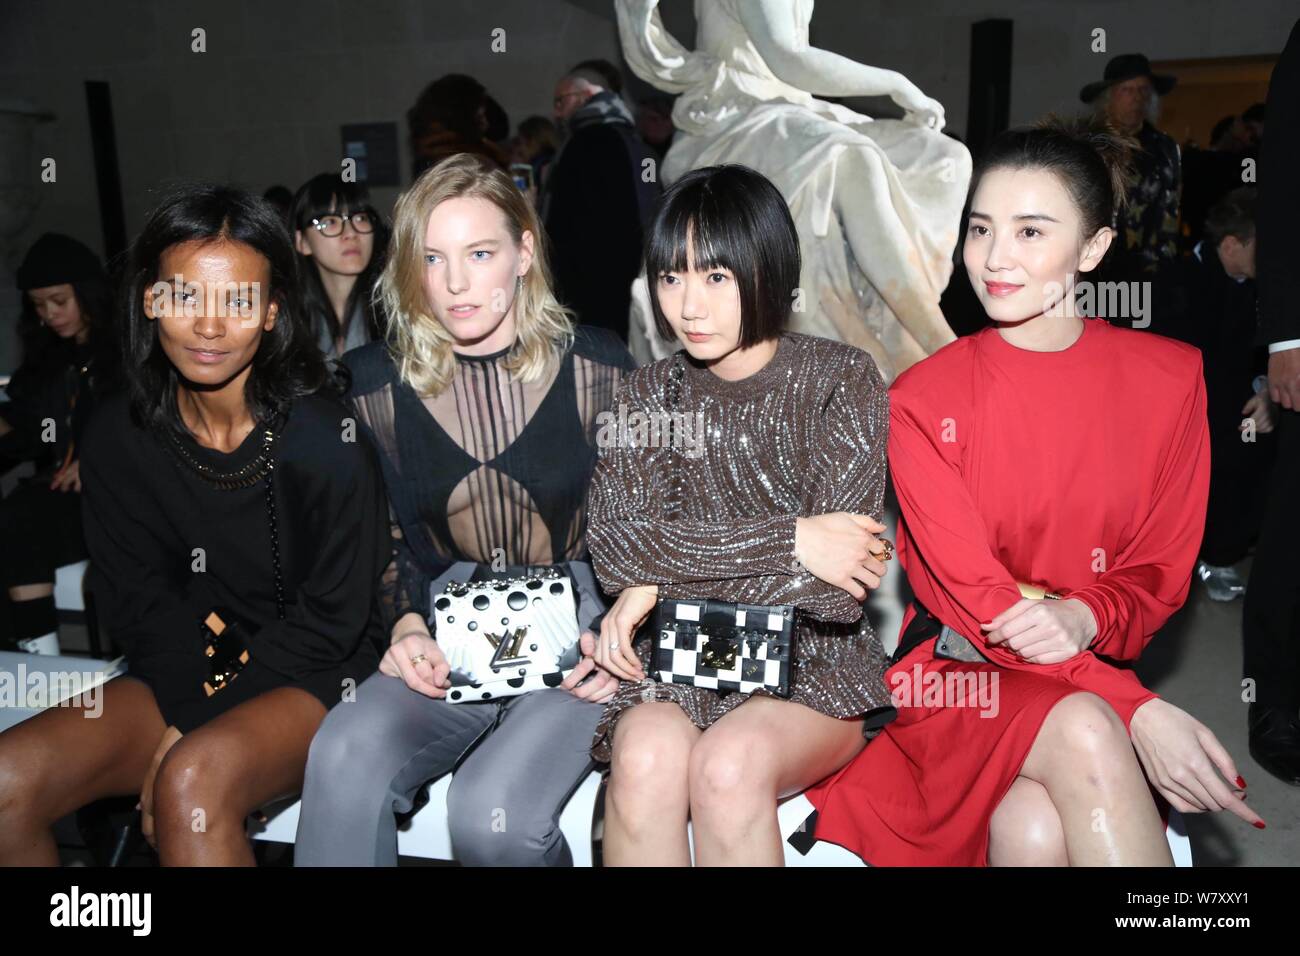 https://c8.alamy.com/comp/W7XXY1/south-korean-actress-bae-doo-na-second-right-and-chinese-actress-song-jia-right-attend-the-louis-vuitton-lv-fashion-show-during-the-paris-fashio-W7XXY1.jpg